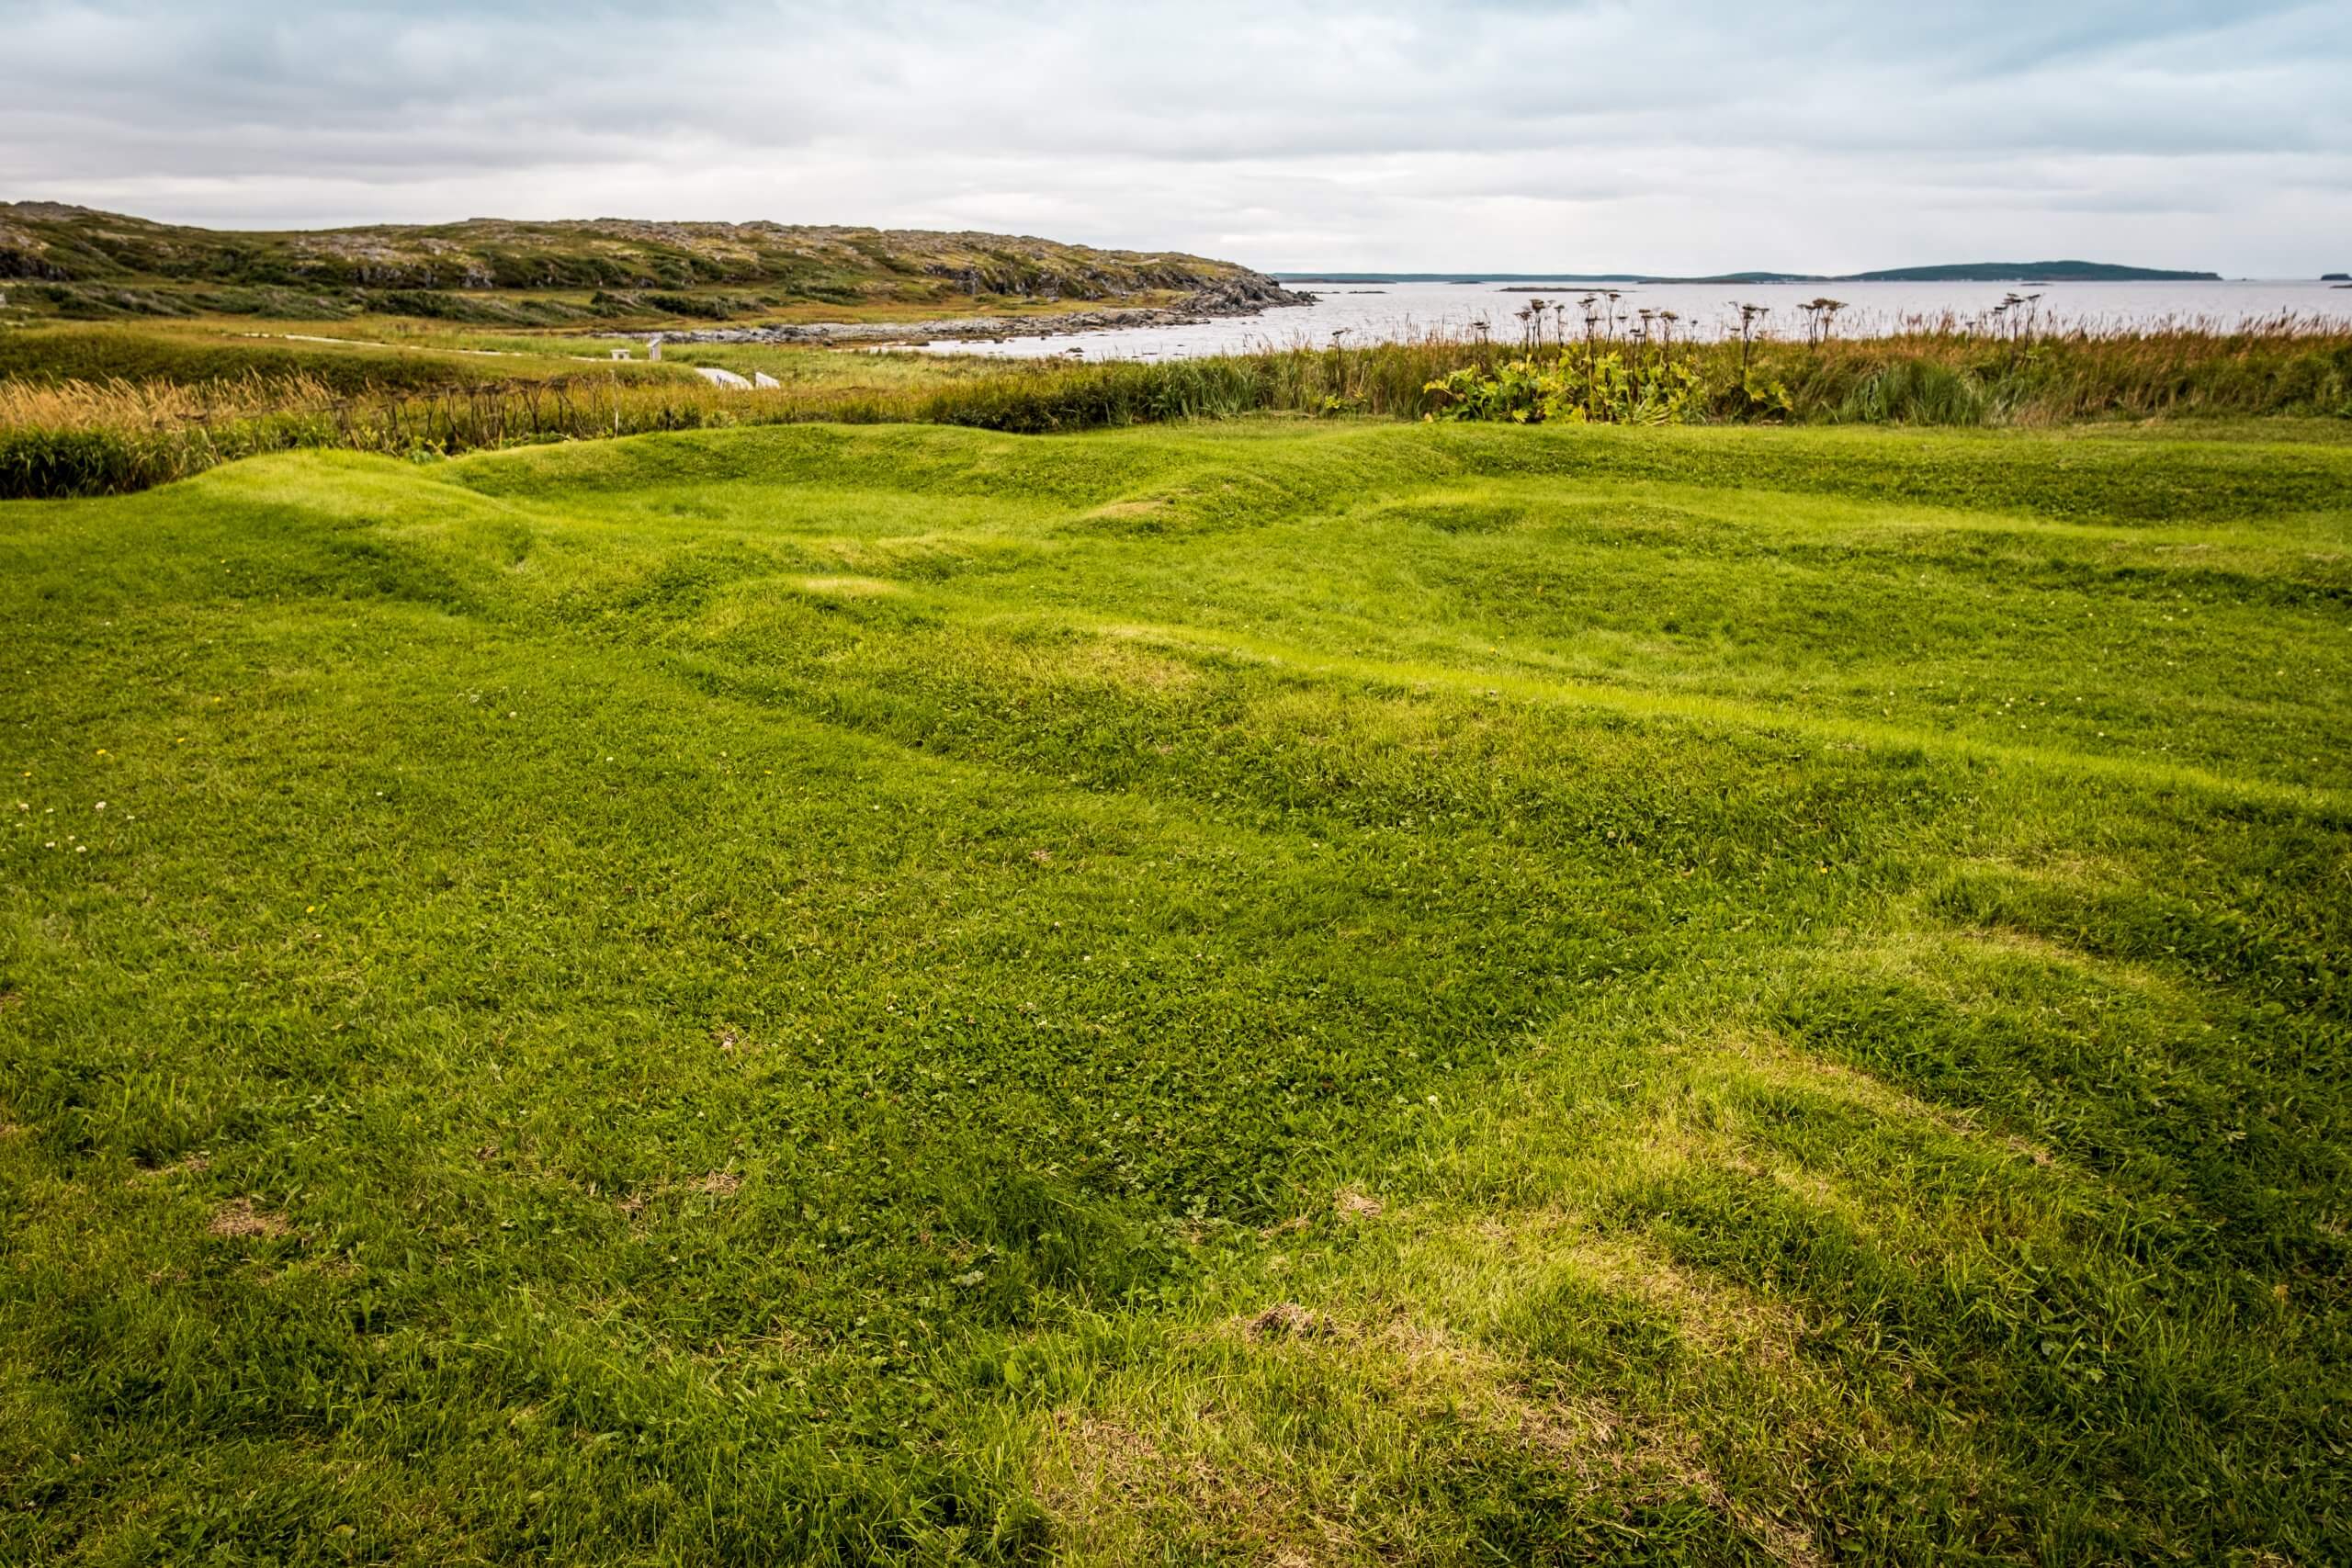 A grassy area at L’Anse aux Meadows where Norse settlements once stood